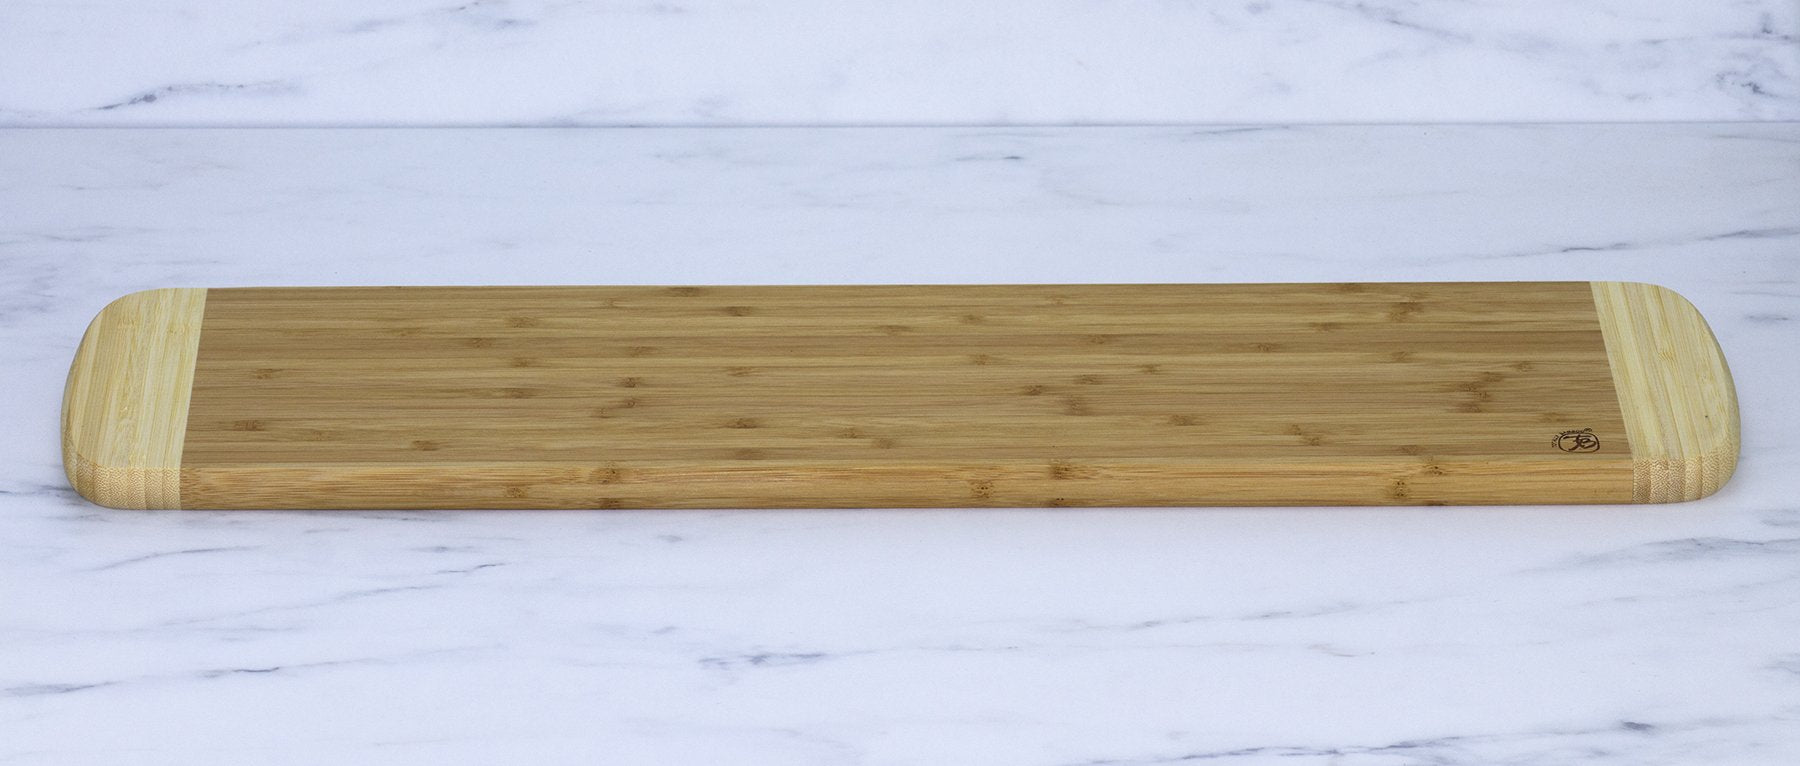 Totally Bamboo Palaoa Bread Cutting and Serving Board